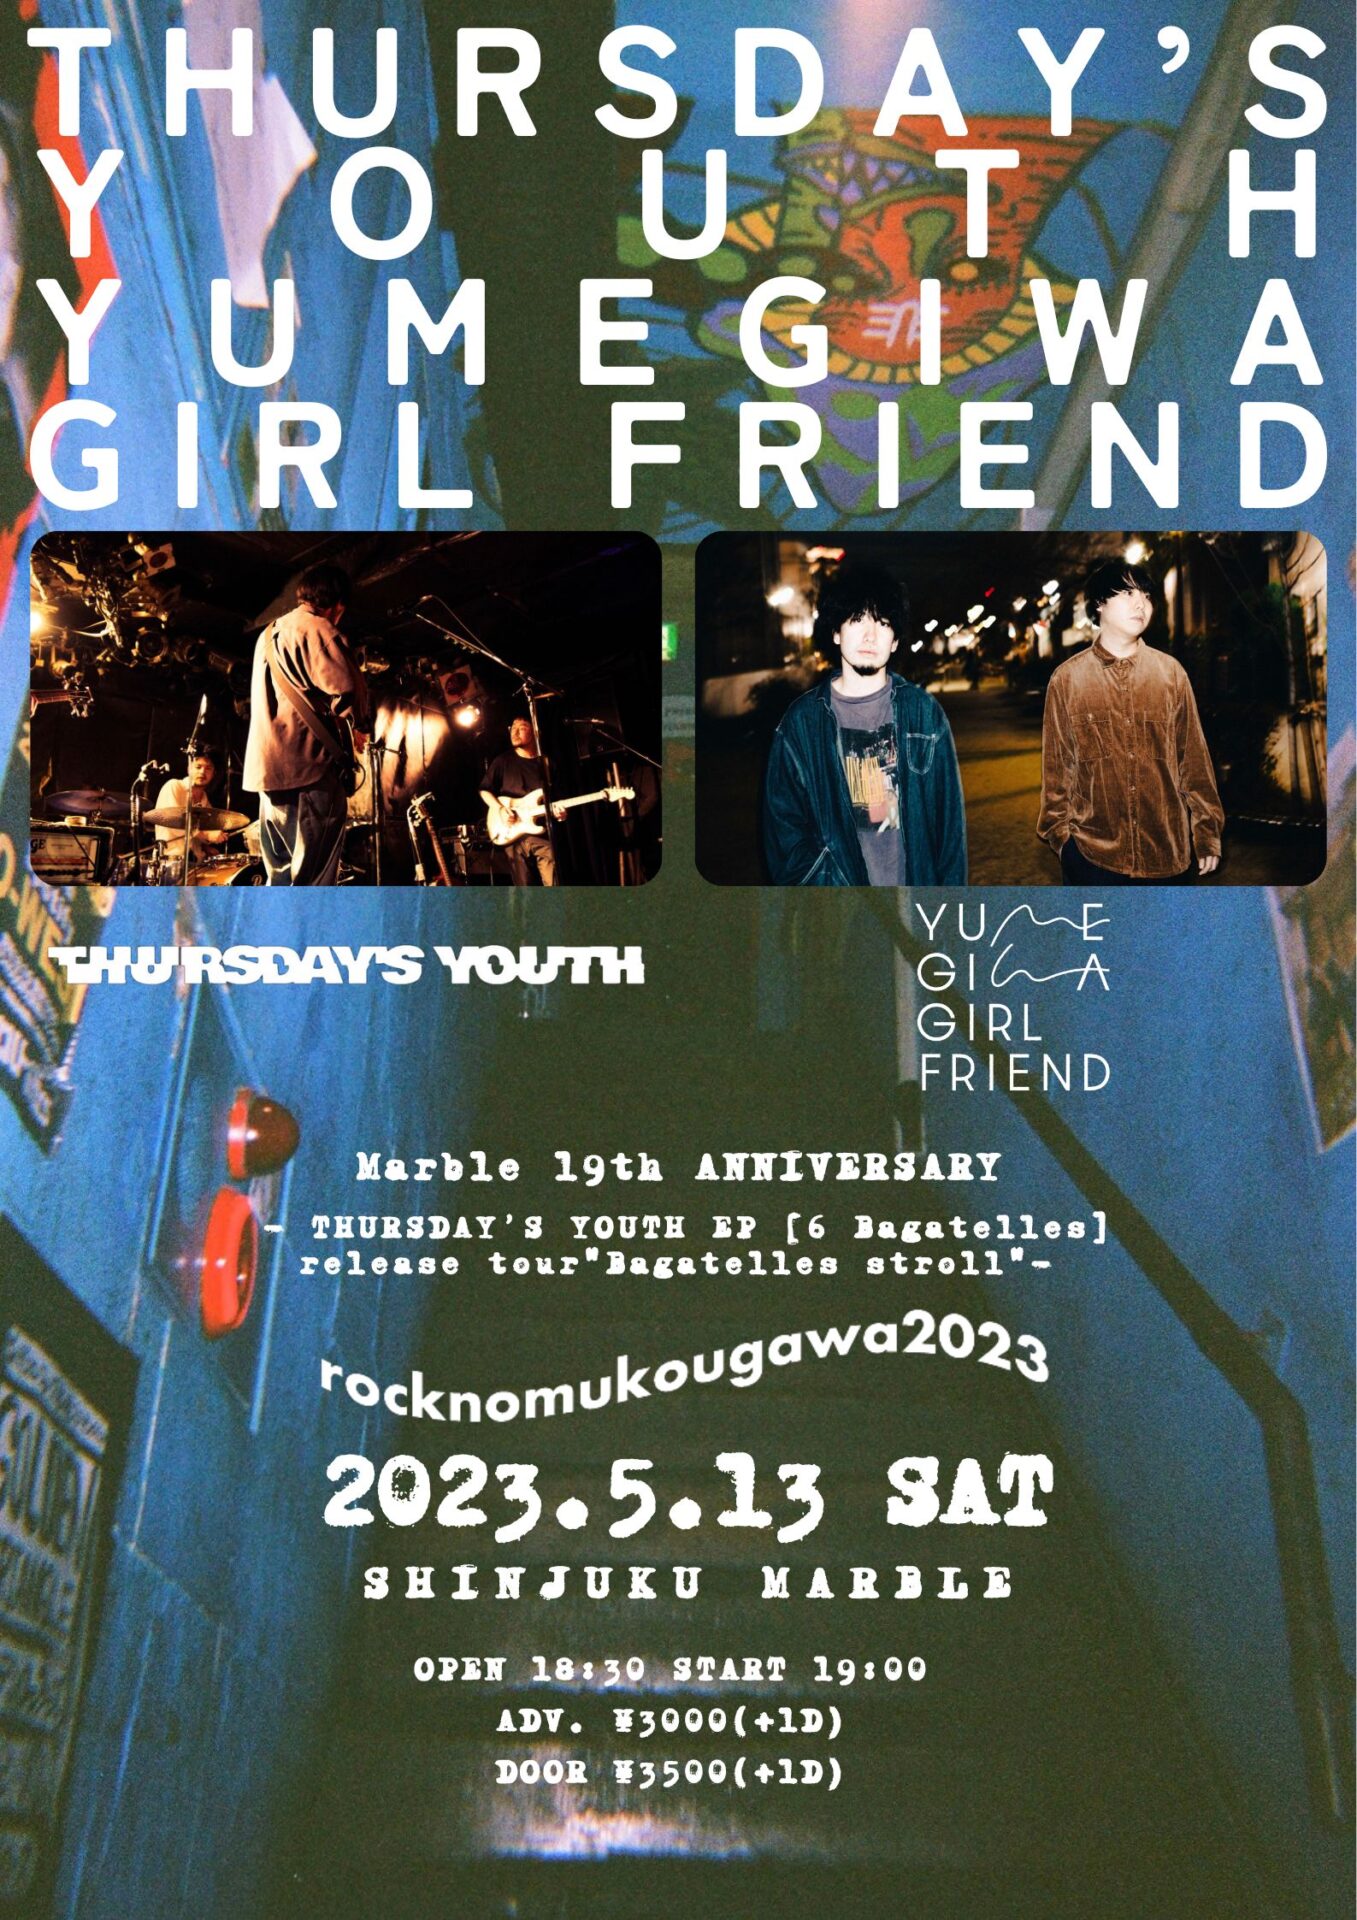 Marble 19th ANNIVERSARY「rocknomukougawa2023」 〜 THURSDAY’S YOUTH EP「6 Bagatelles」 release tour"Bagatelles stroll" 〜